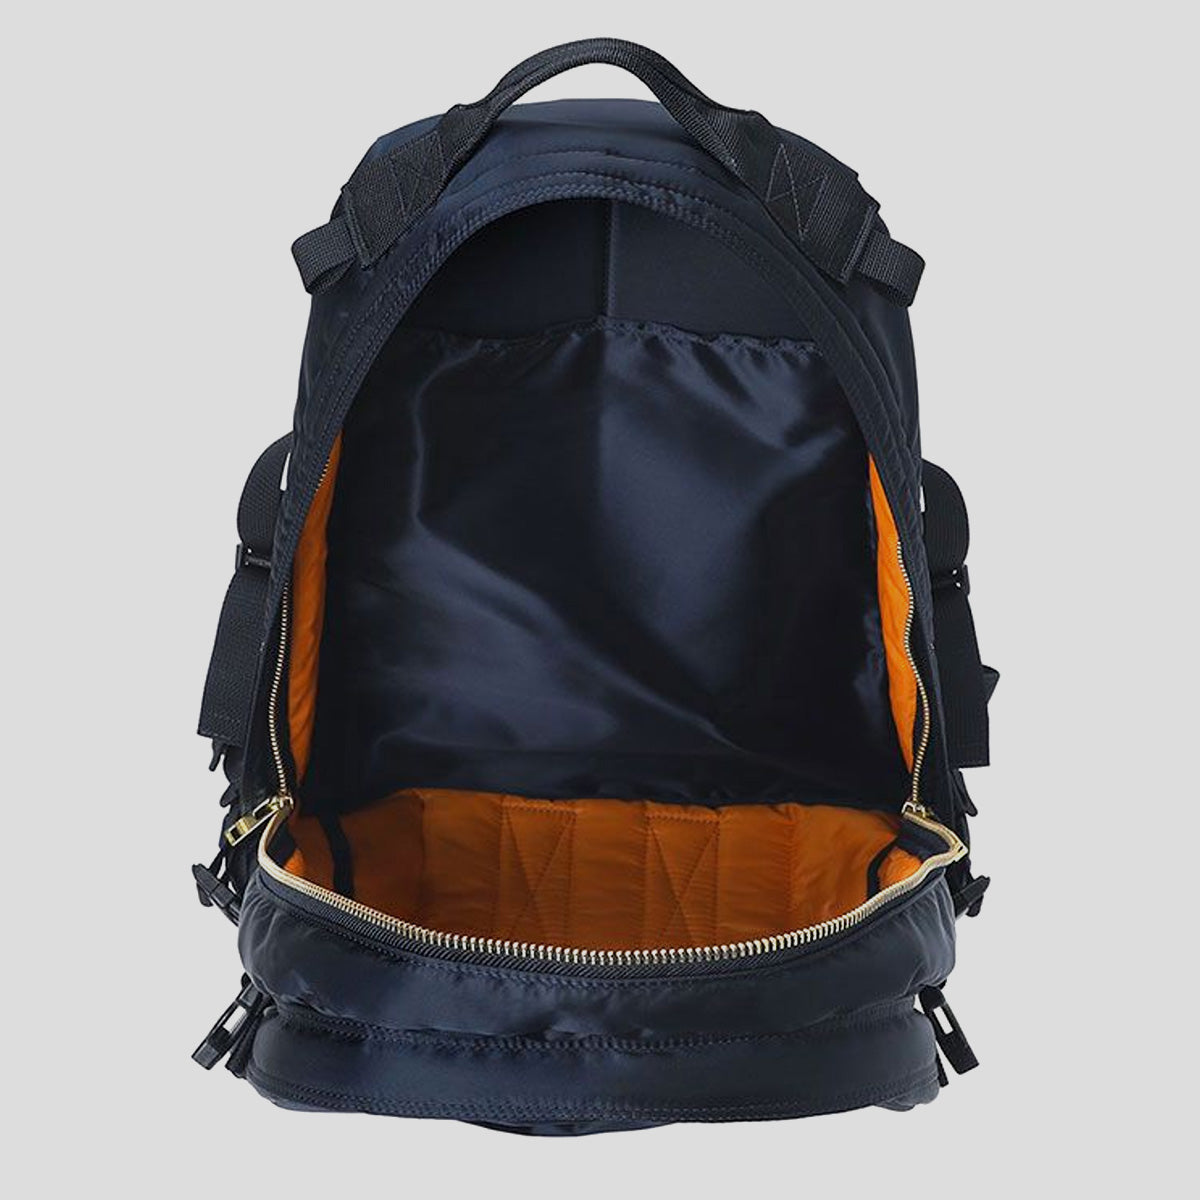 Tanker Day Pack - Iron Blue 50